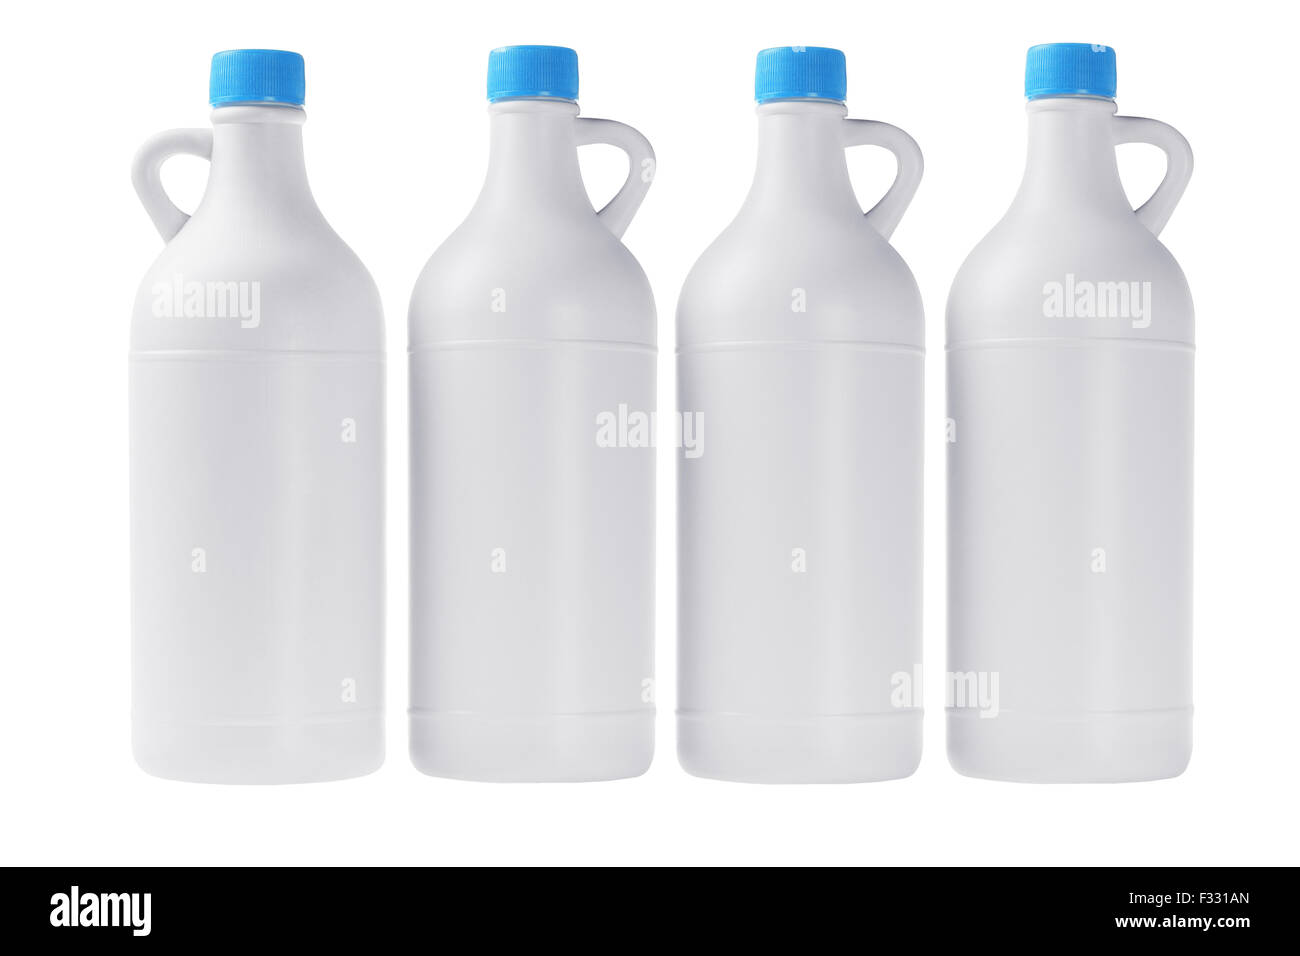 Plastic Detergent Bottles in a Row on White Background Stock Photo